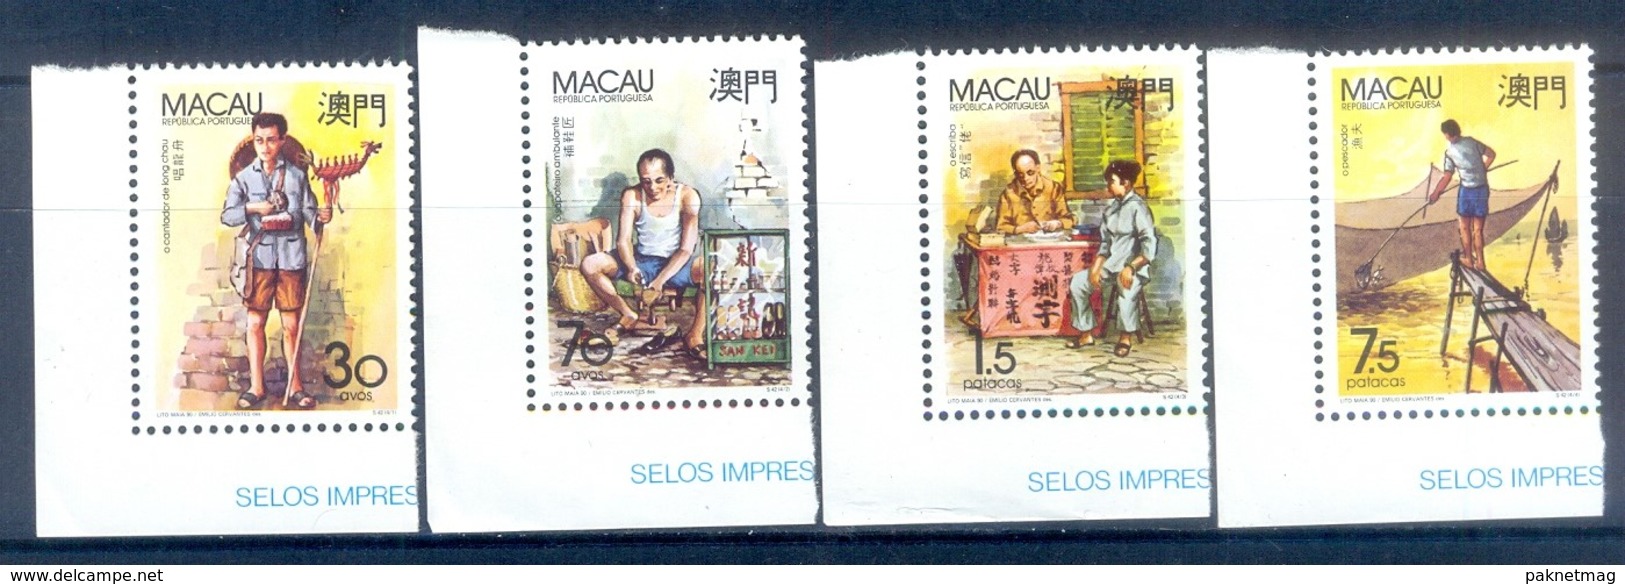 H134- Macau Macao China 1990. Typical Occupations. Ship. - Unused Stamps